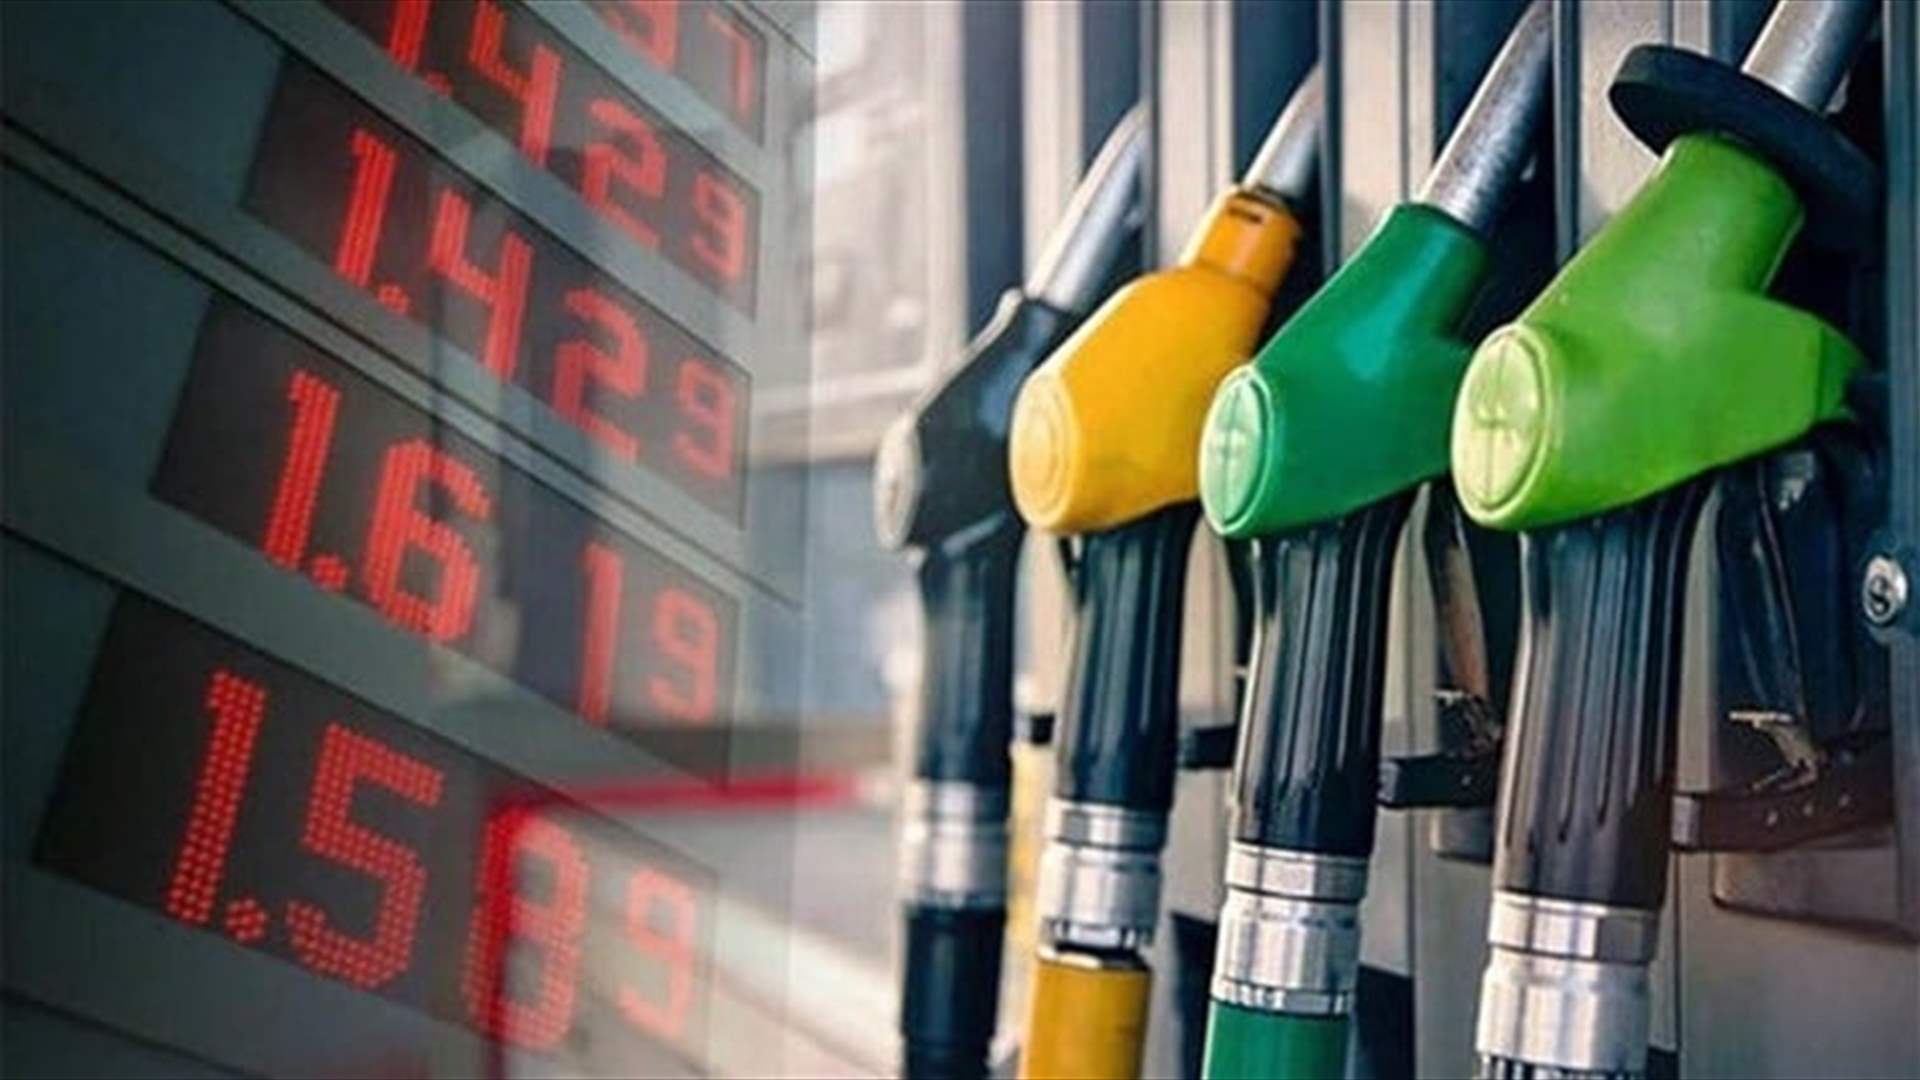 Lebanon gas station owners union demands pricing in US Dollars